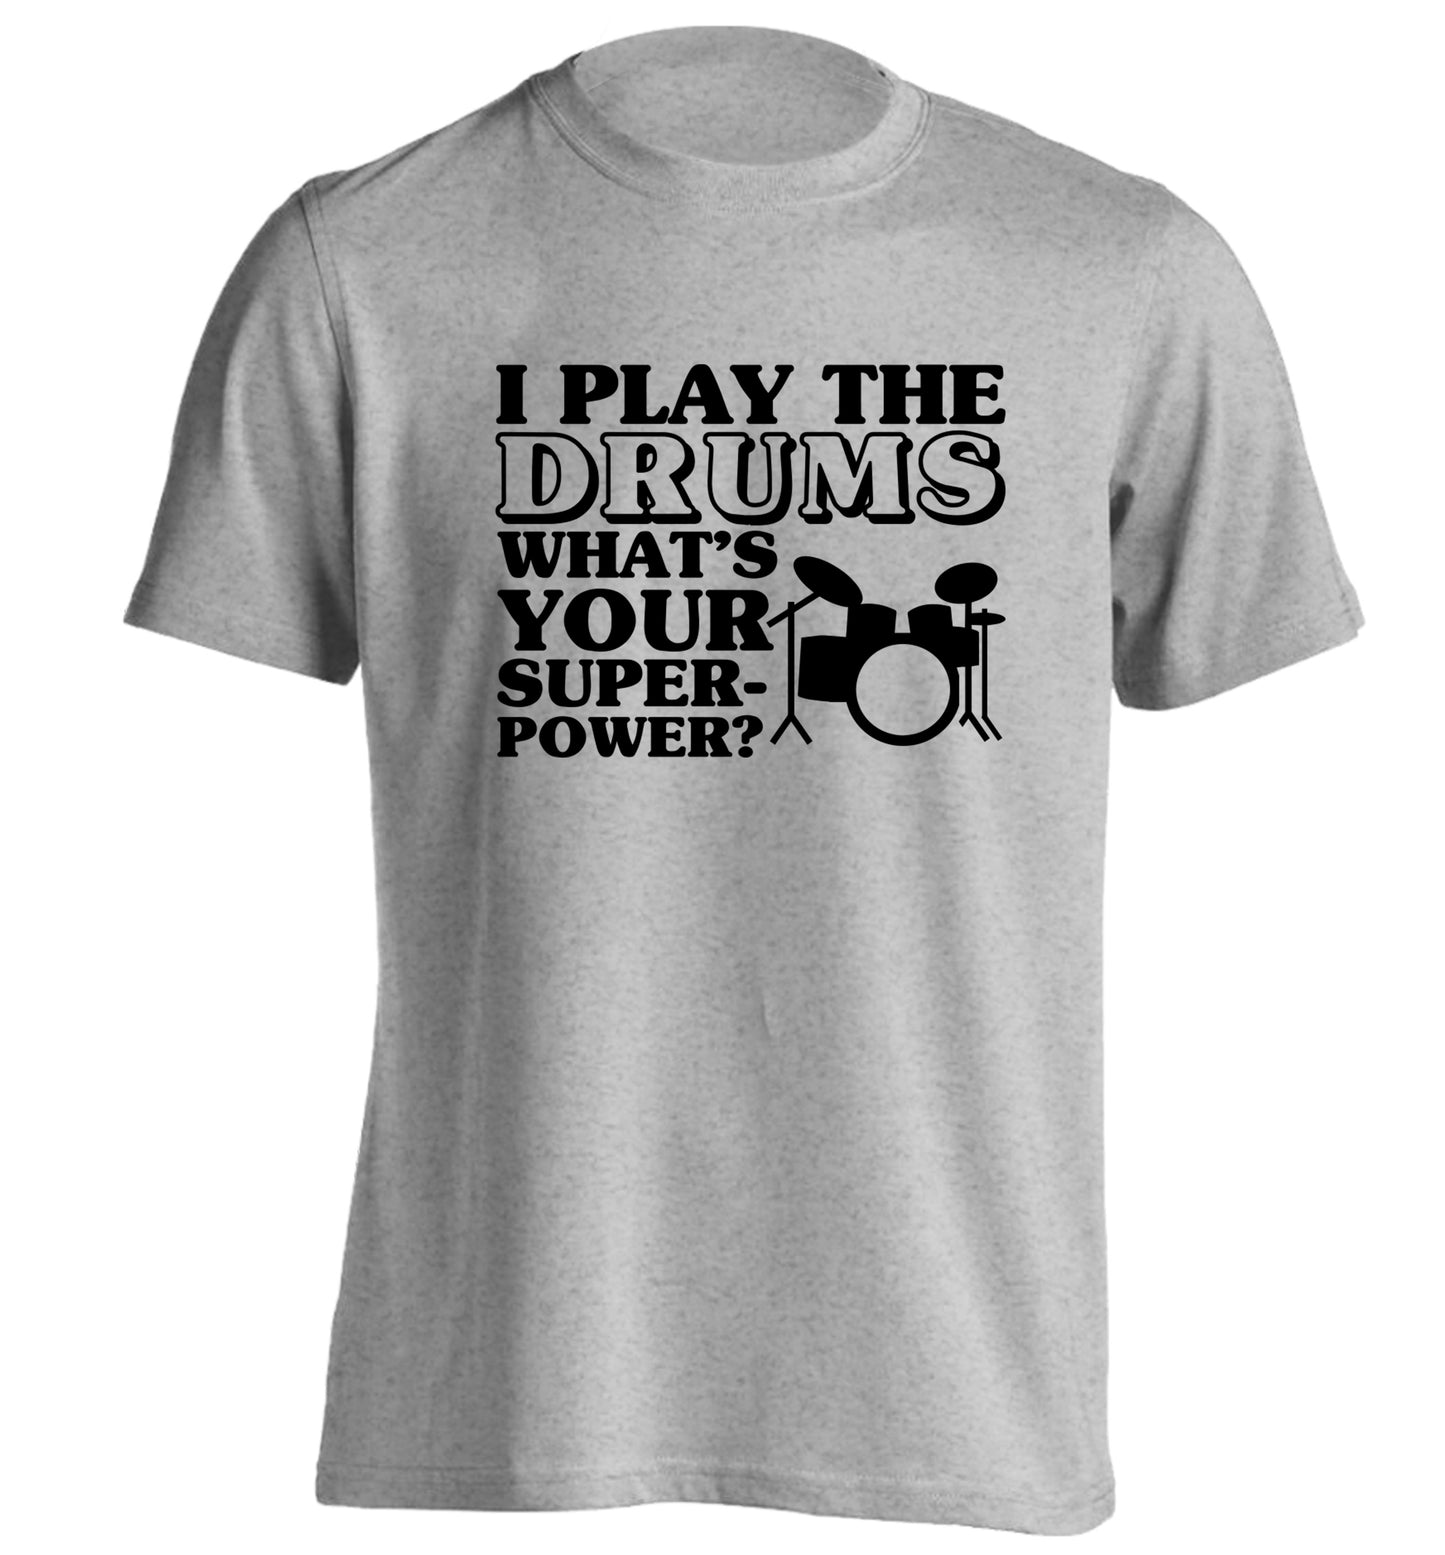 I play the drums what's your superpower? adults unisexgrey Tshirt 2XL